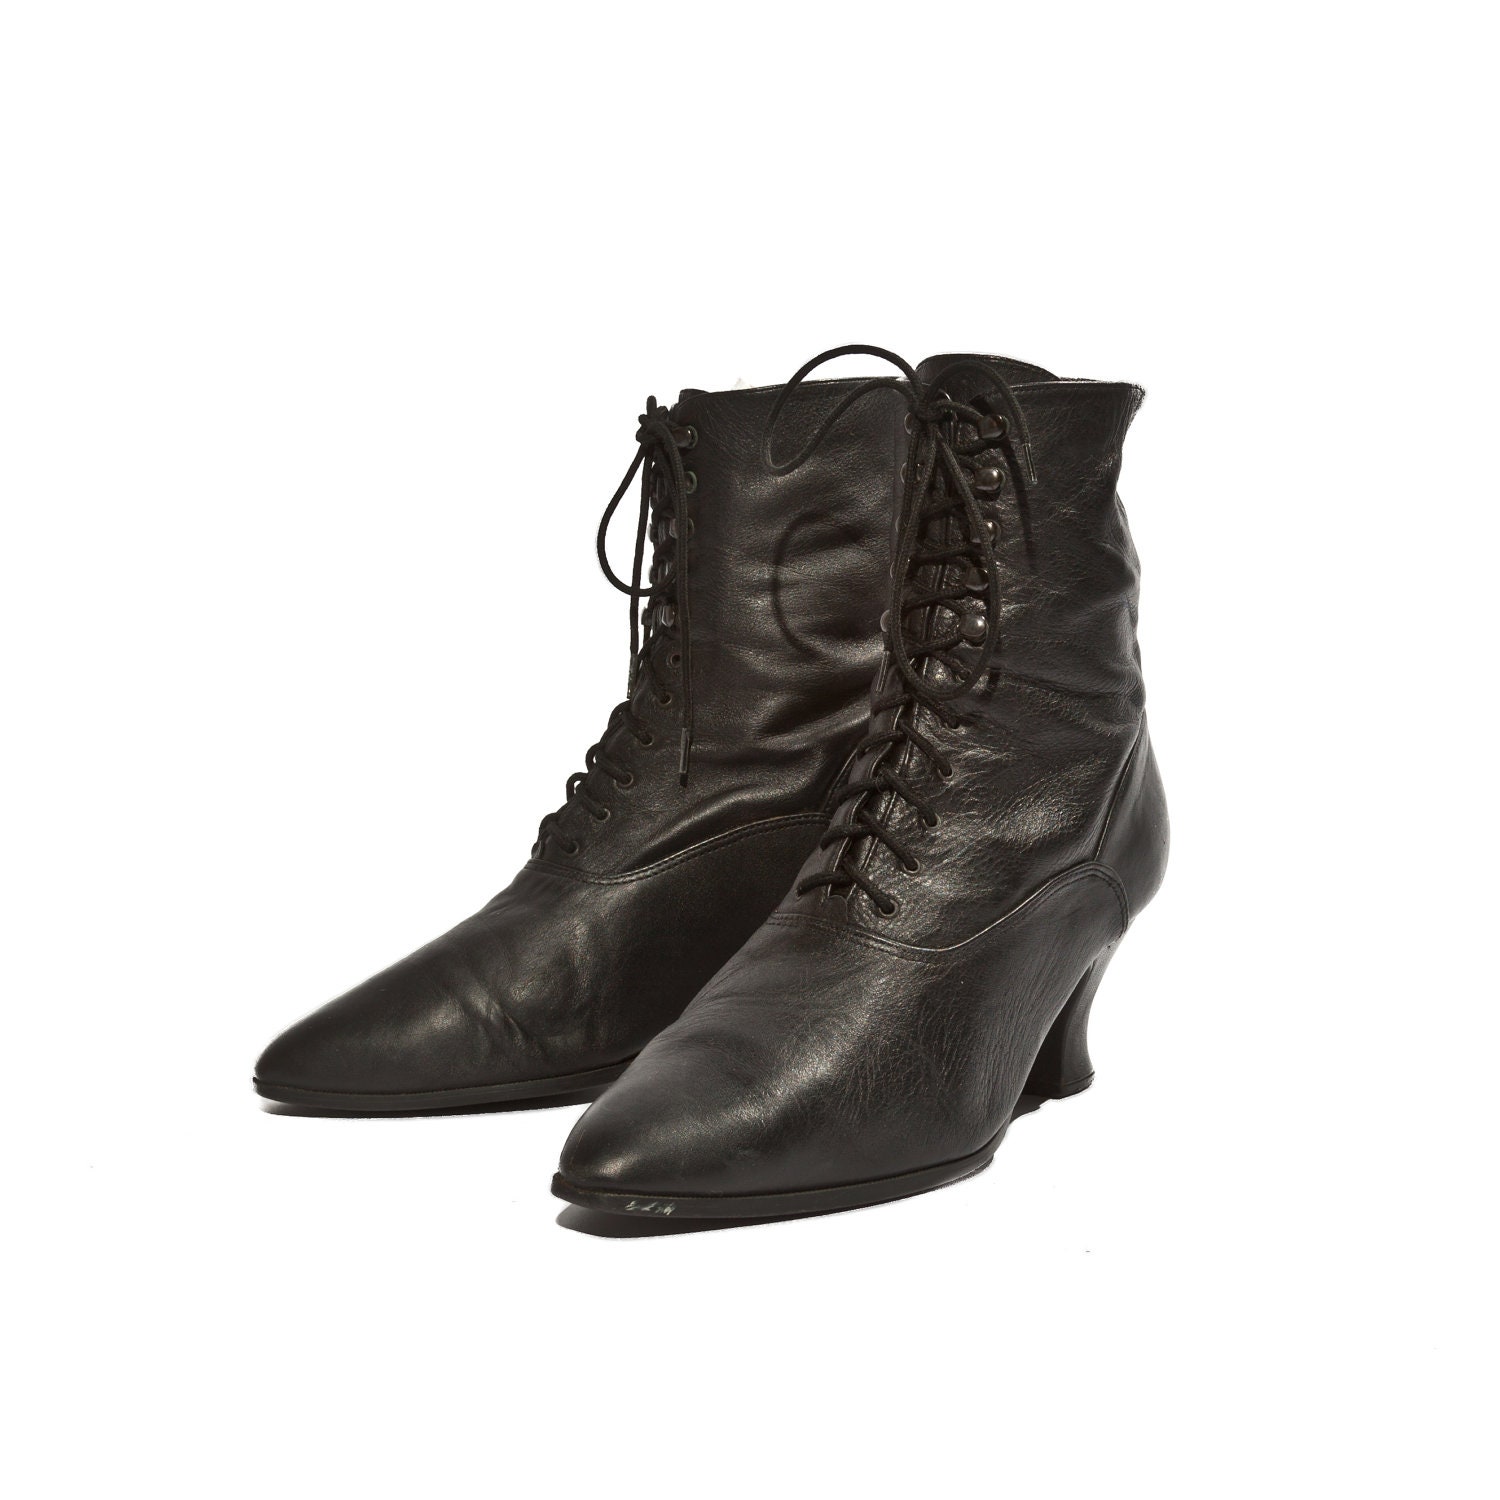 Women's Lace Up Ankle Granny Boots with Tall Heels in by ShopNDG